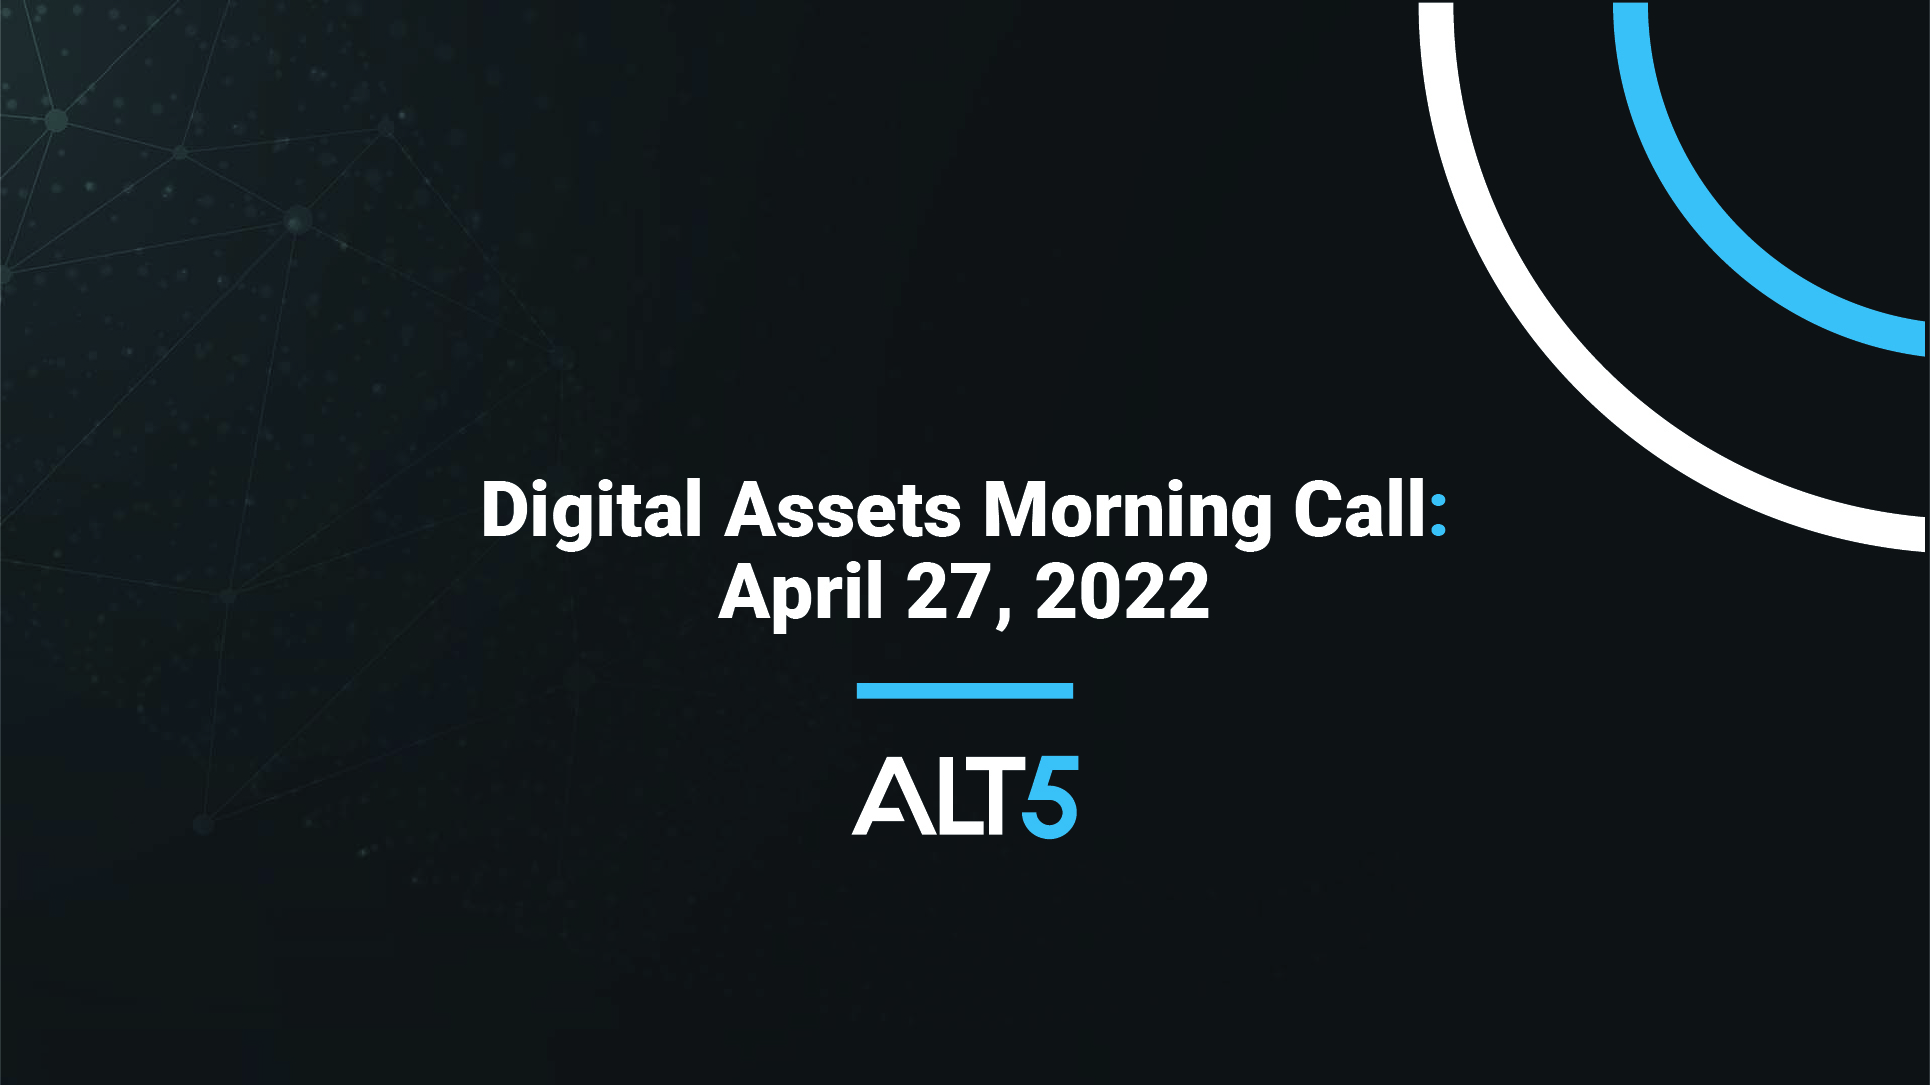 Digital Assets Morning Call: April 27 2022 - Opinions and actions on U.S. crypto regulations; European stresses intensify